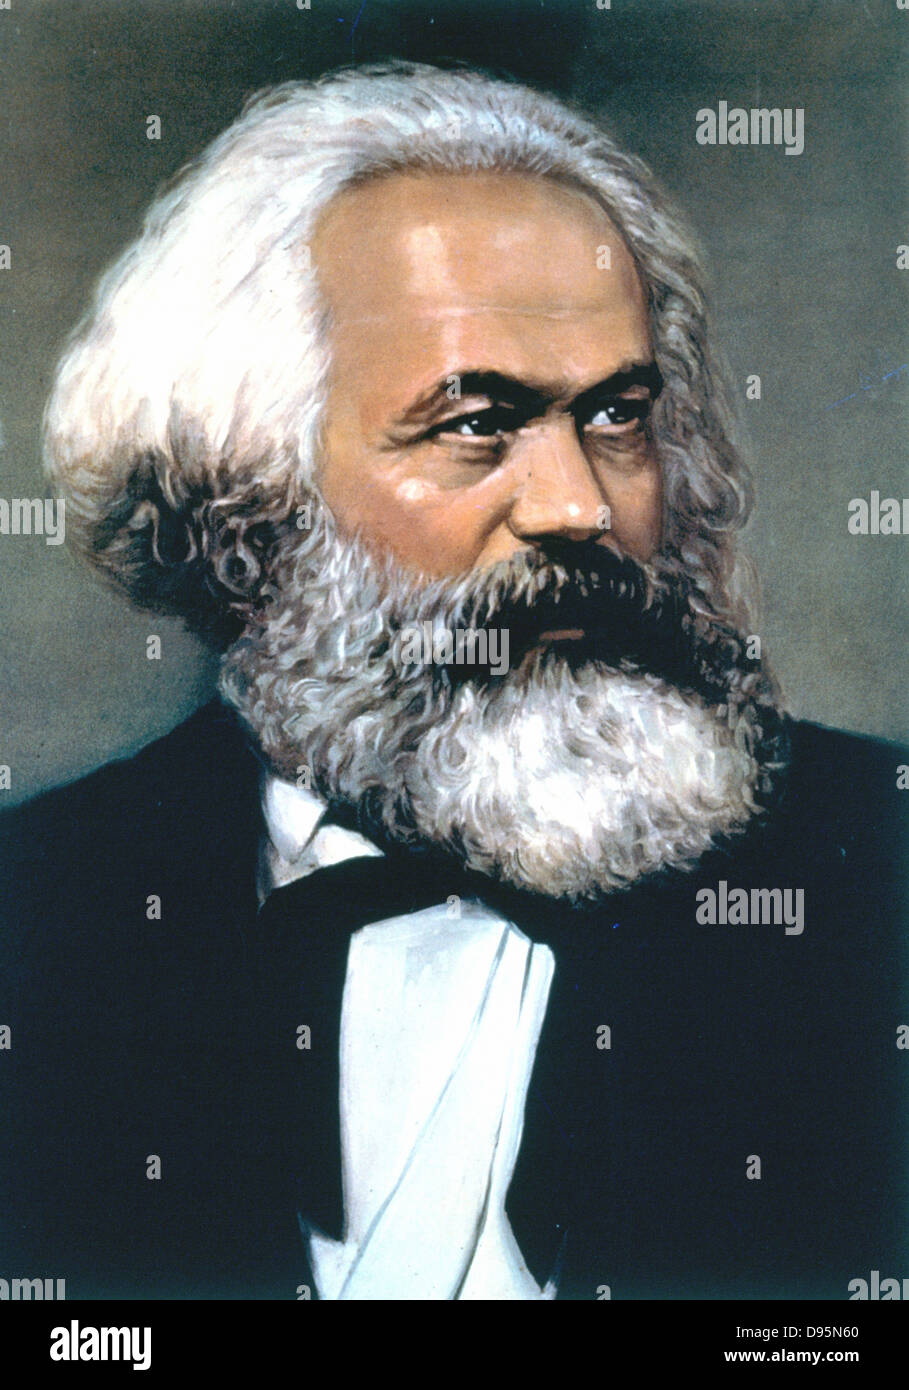 Karl Marx (1818-1883) German social, political and economic theorist. Theories formed basis of modern Communism Stock Photo